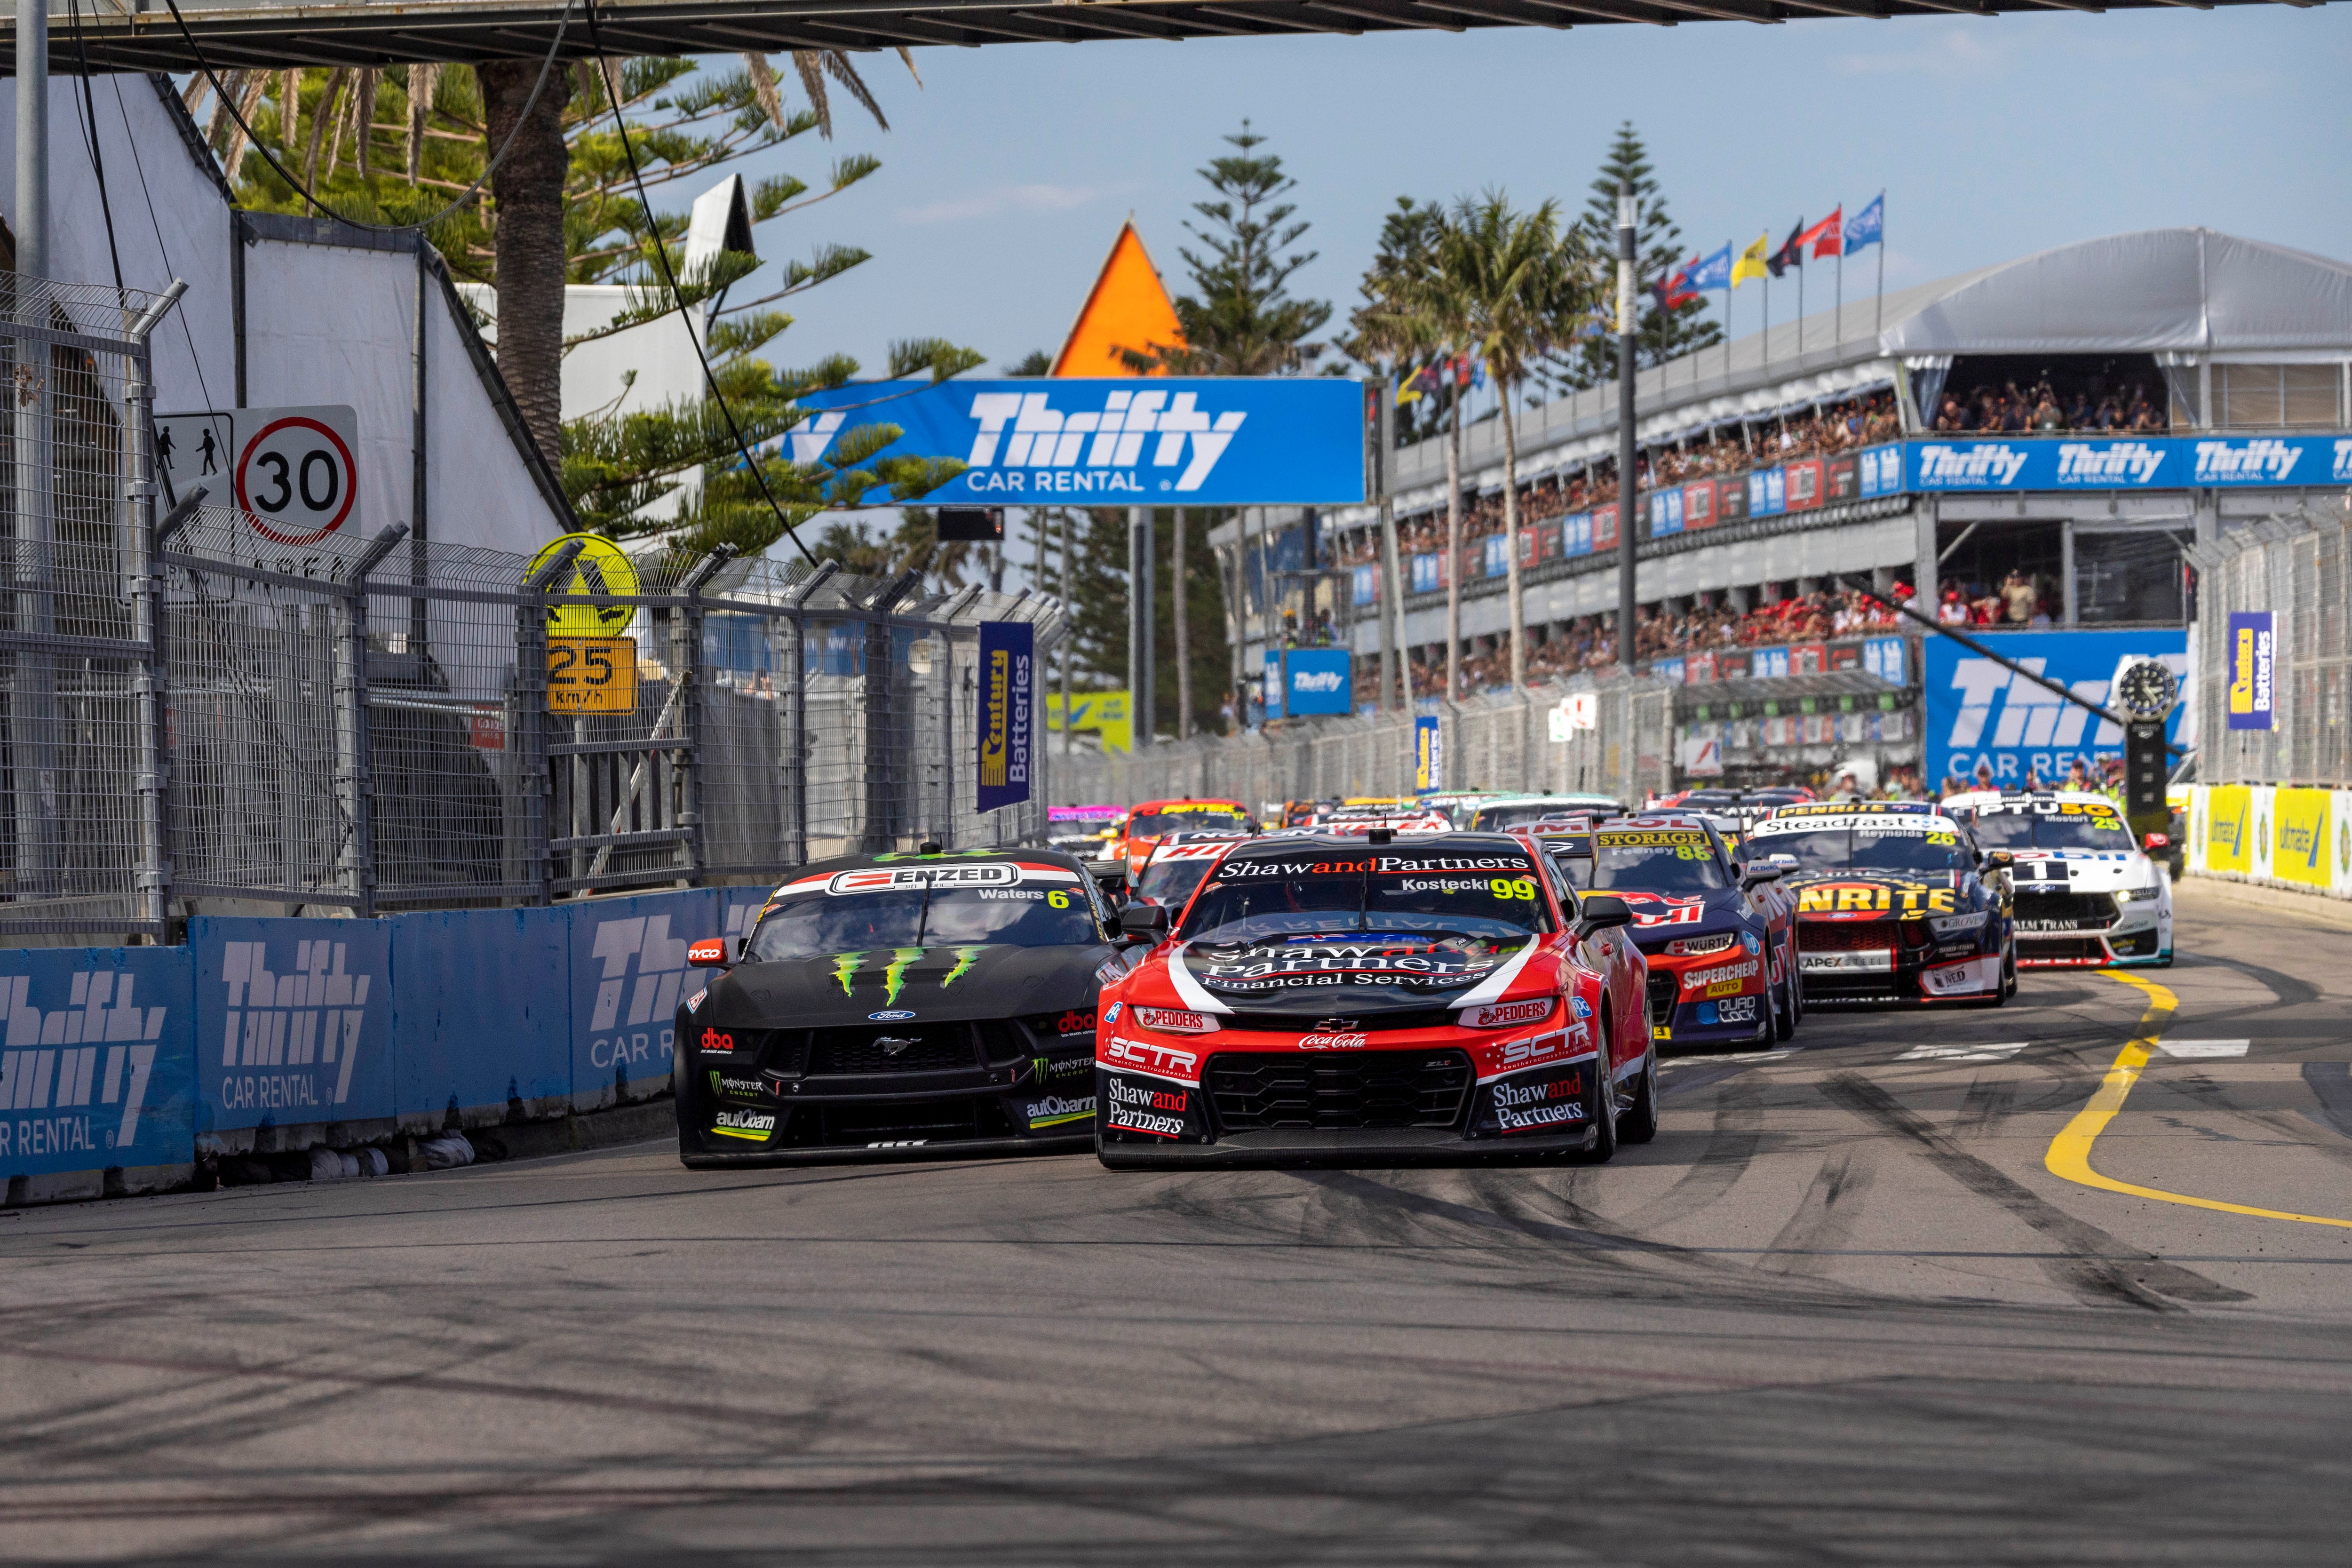 Watch Motorsport LIVE Supercars and more on Sky Sport